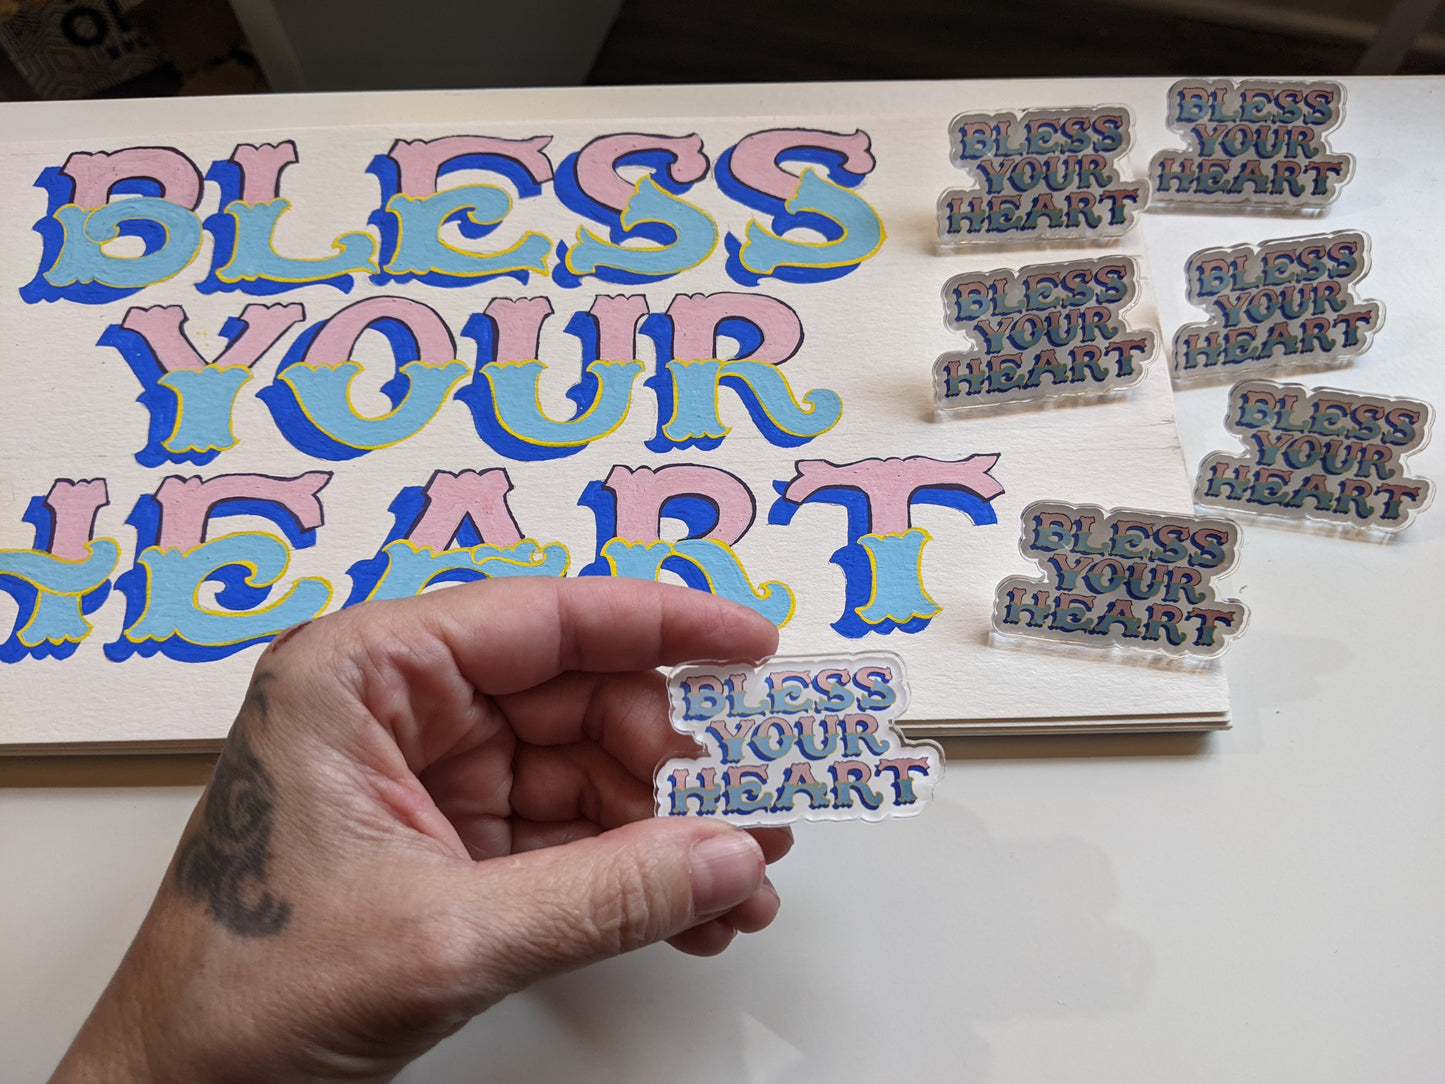 Bless your heart pin